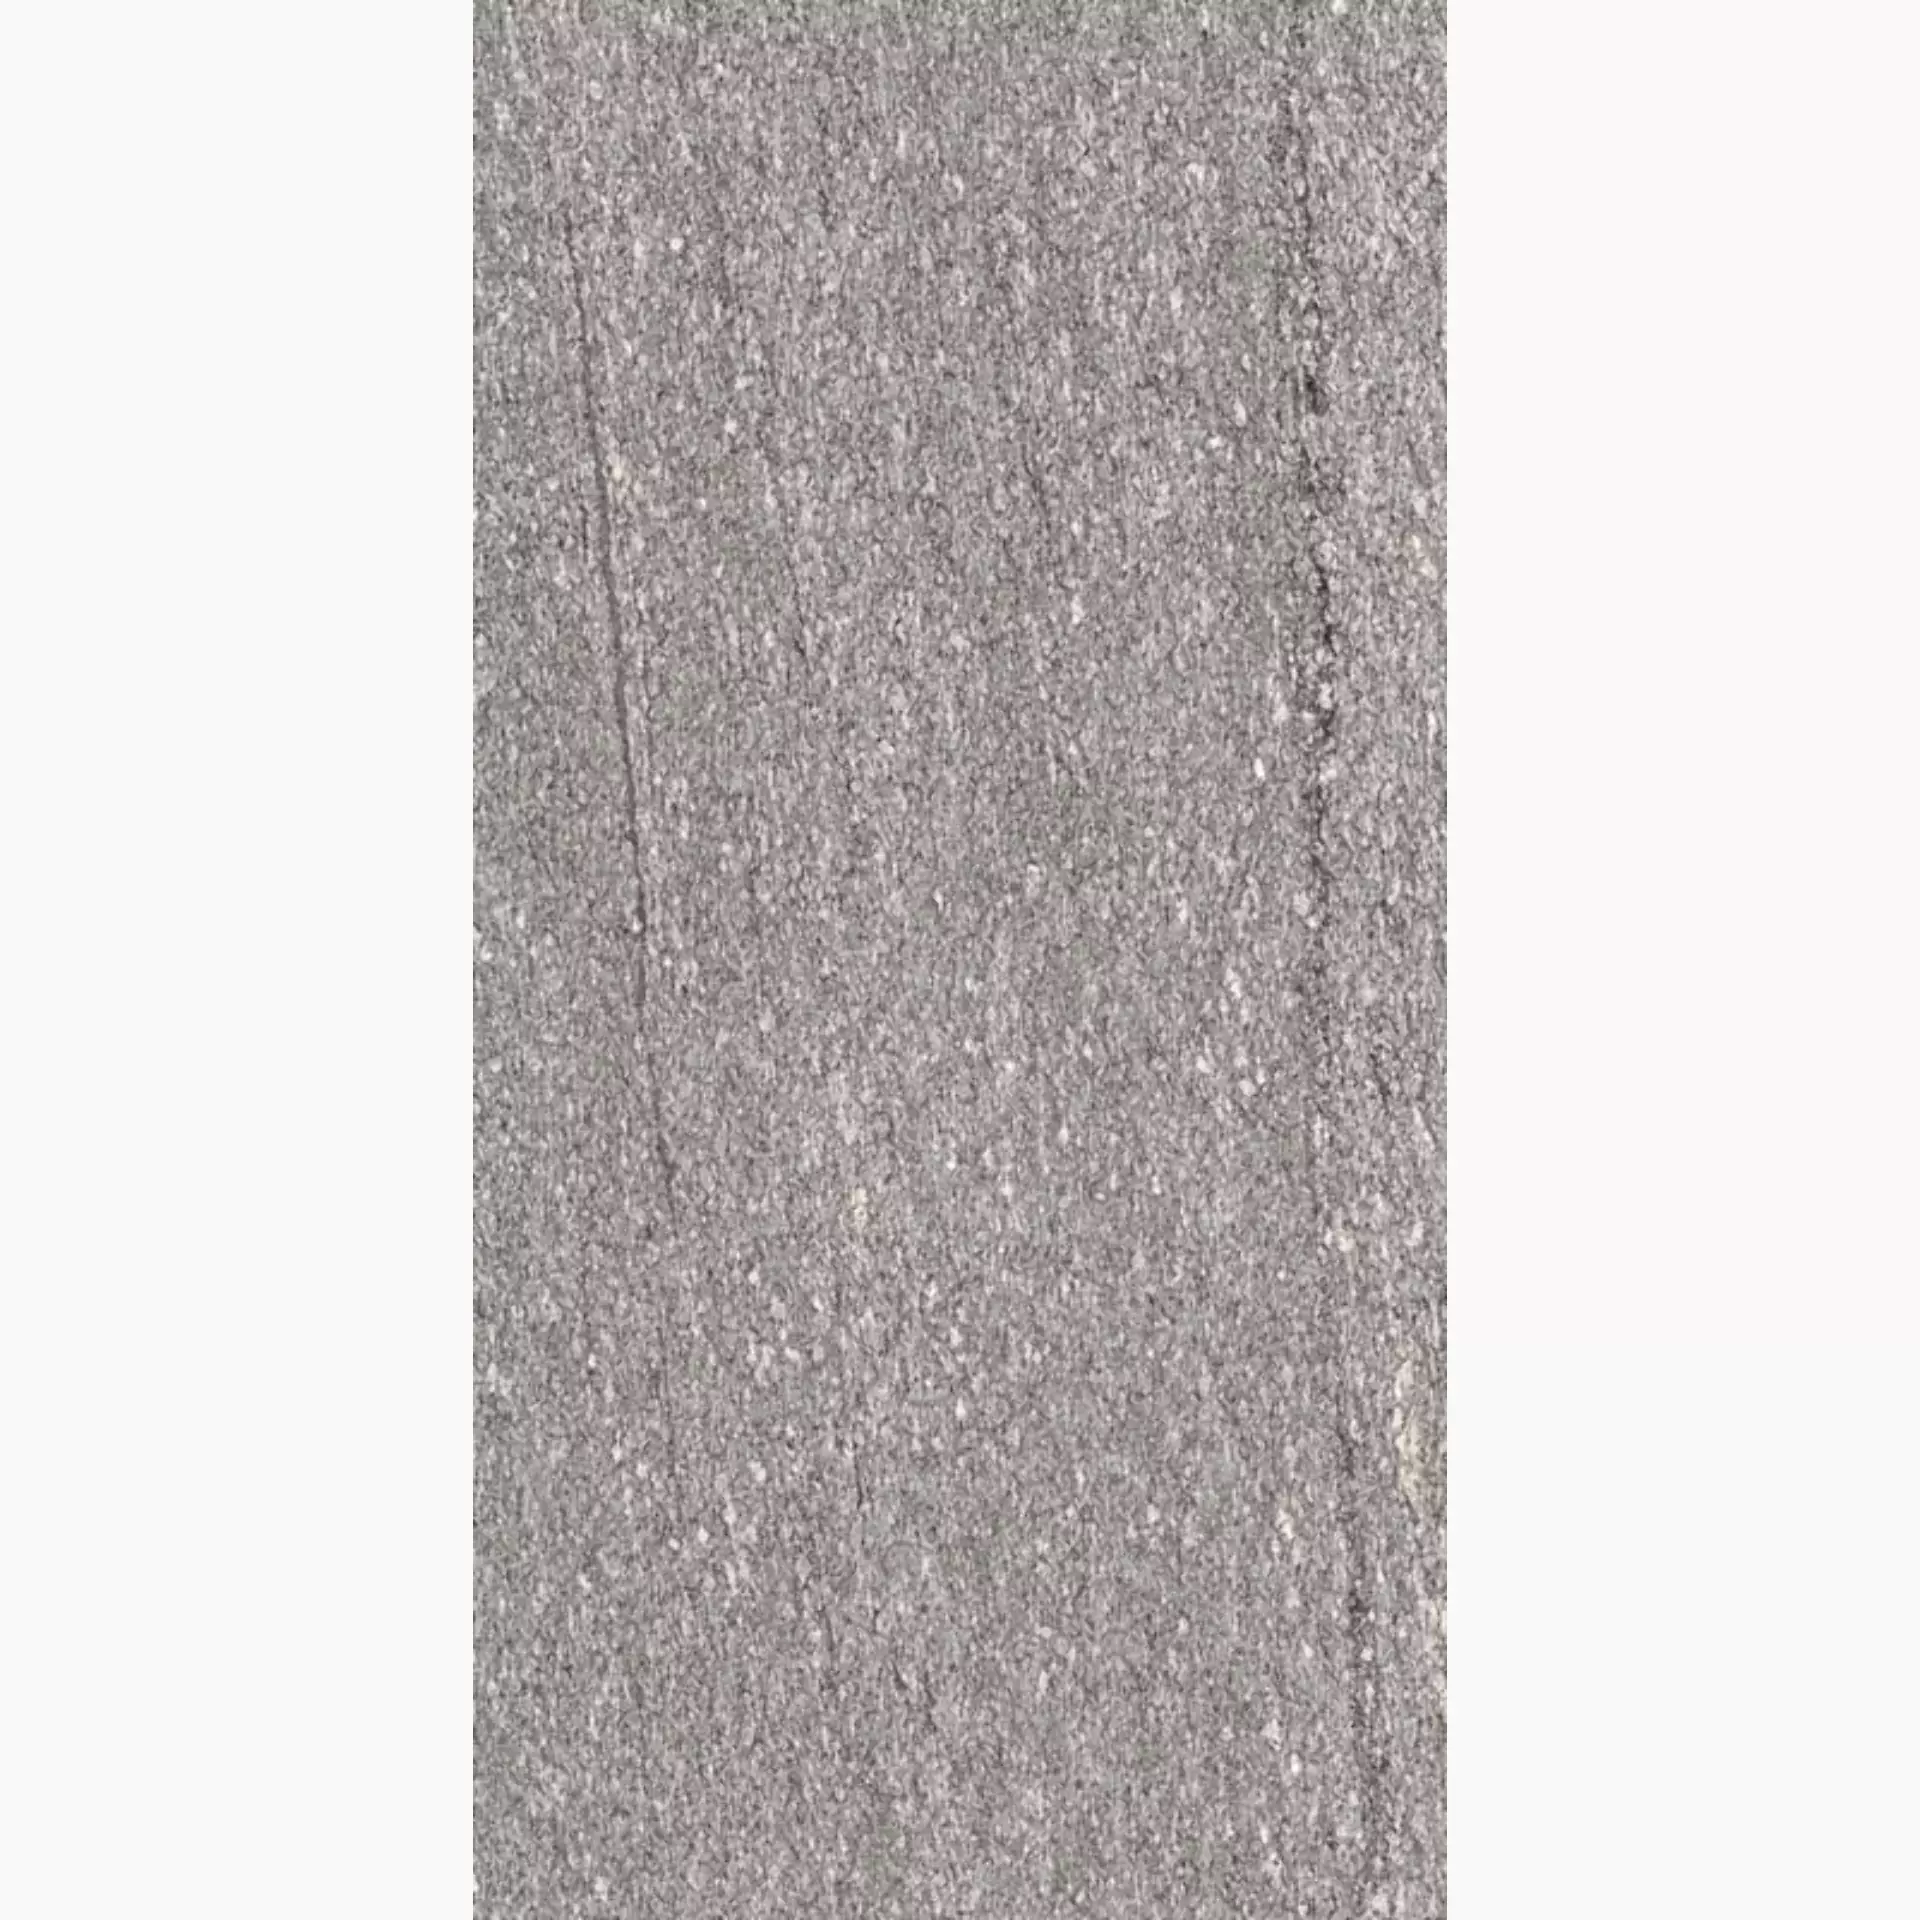 Sant Agostino Unionstone London Grey Natural CSALOGRY12 60x120cm rectified 10mm